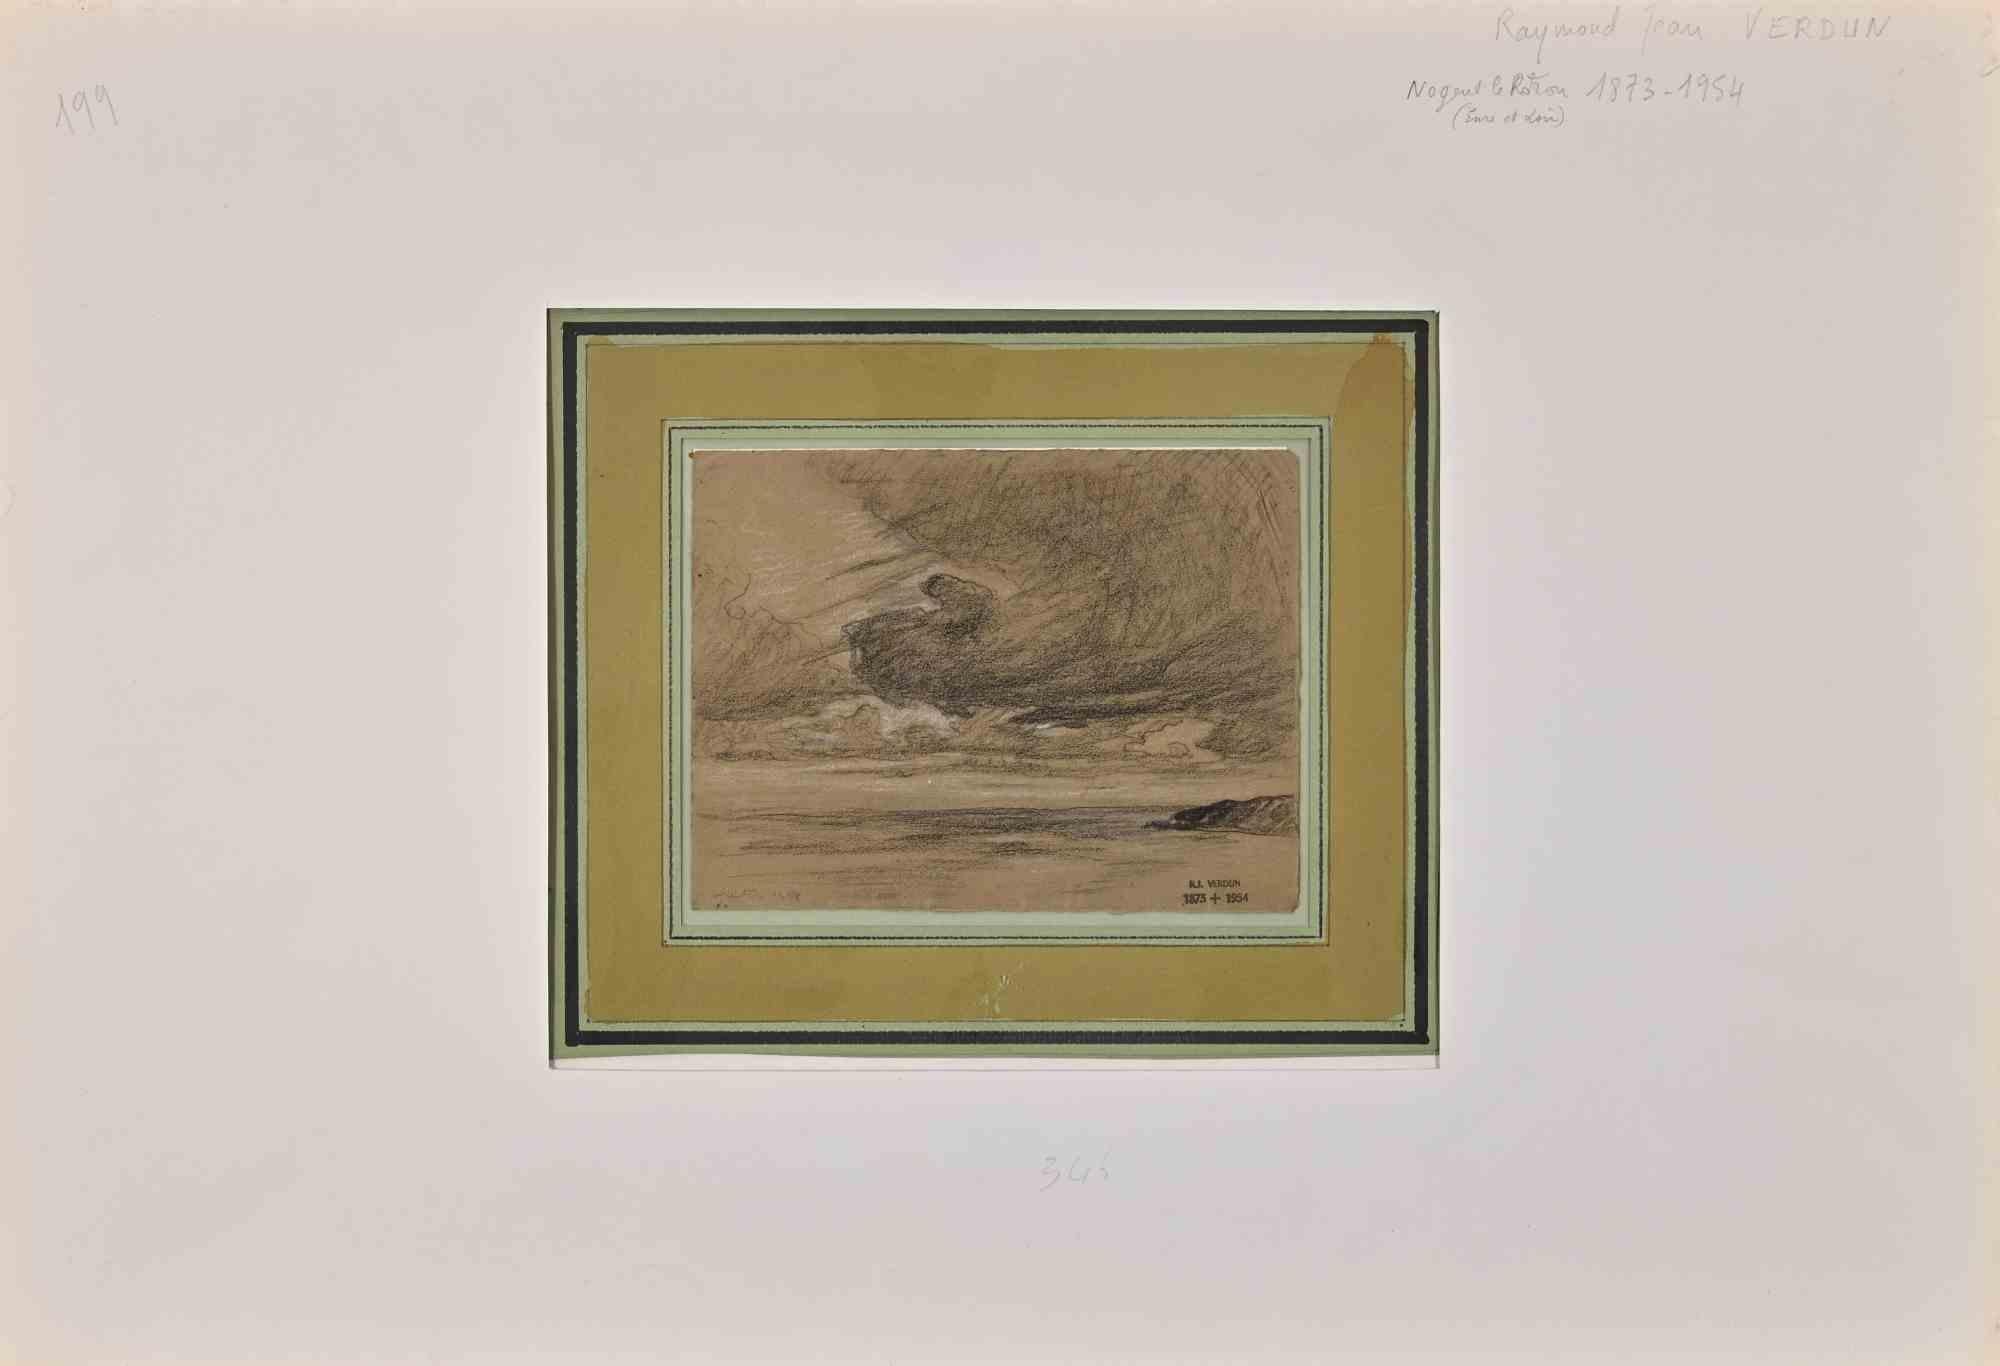 Cloudy is an original pencil drawing realized by Raymond Jean Verdun (1873 - 1954) in 1908.

Hand-signed and dated by the artist.

Good condition.

Born in 1873 in Nogent-le-Rotrou, Raymond Jean Verdun was a student of Henri Harpignies. Like